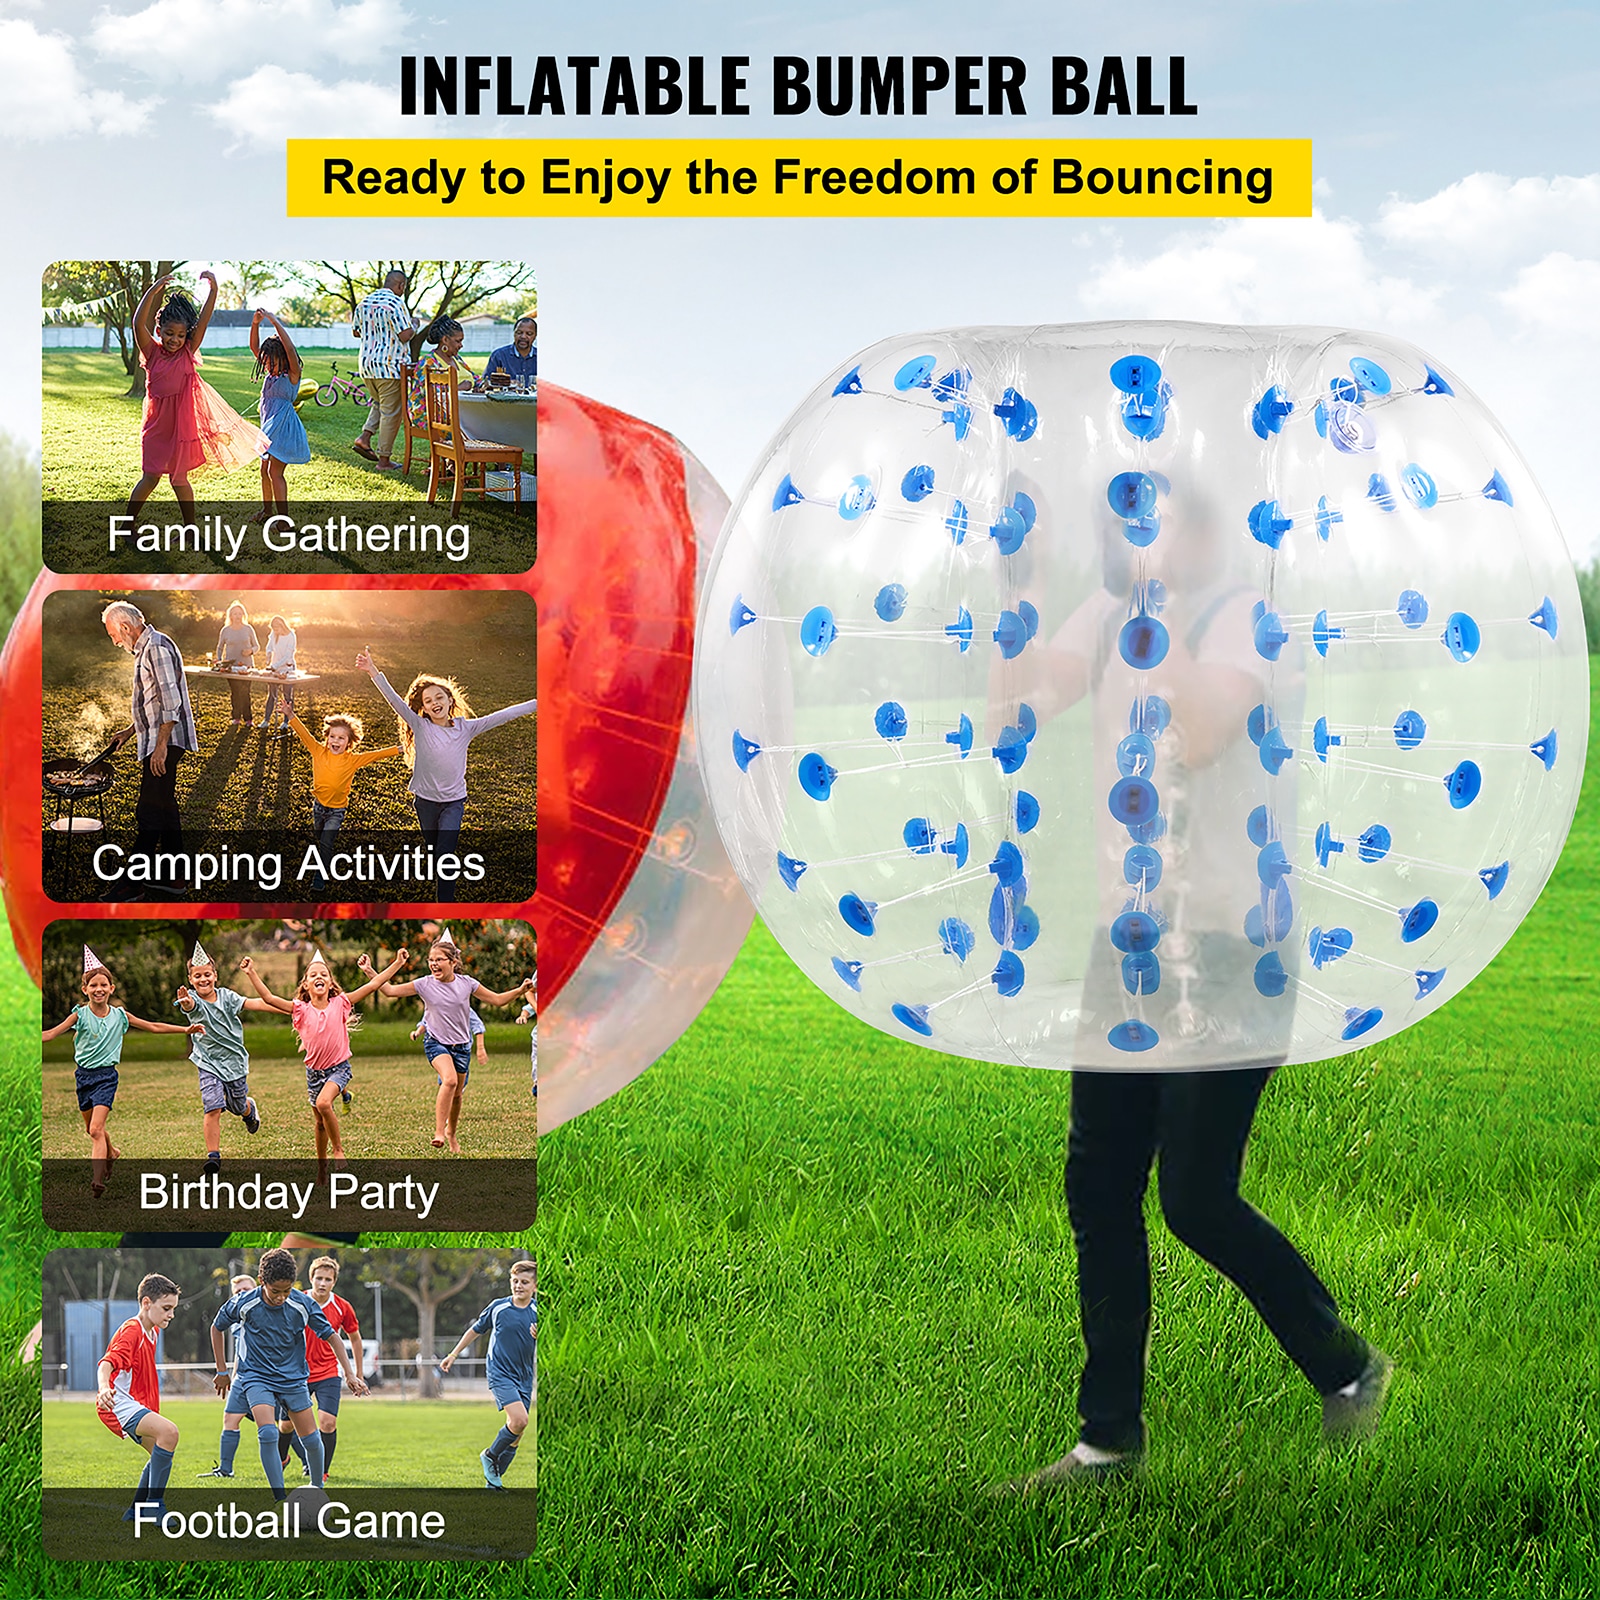 Phlat Ball Jr Assorted - Trampolines, Scooters & Outdoor Toys